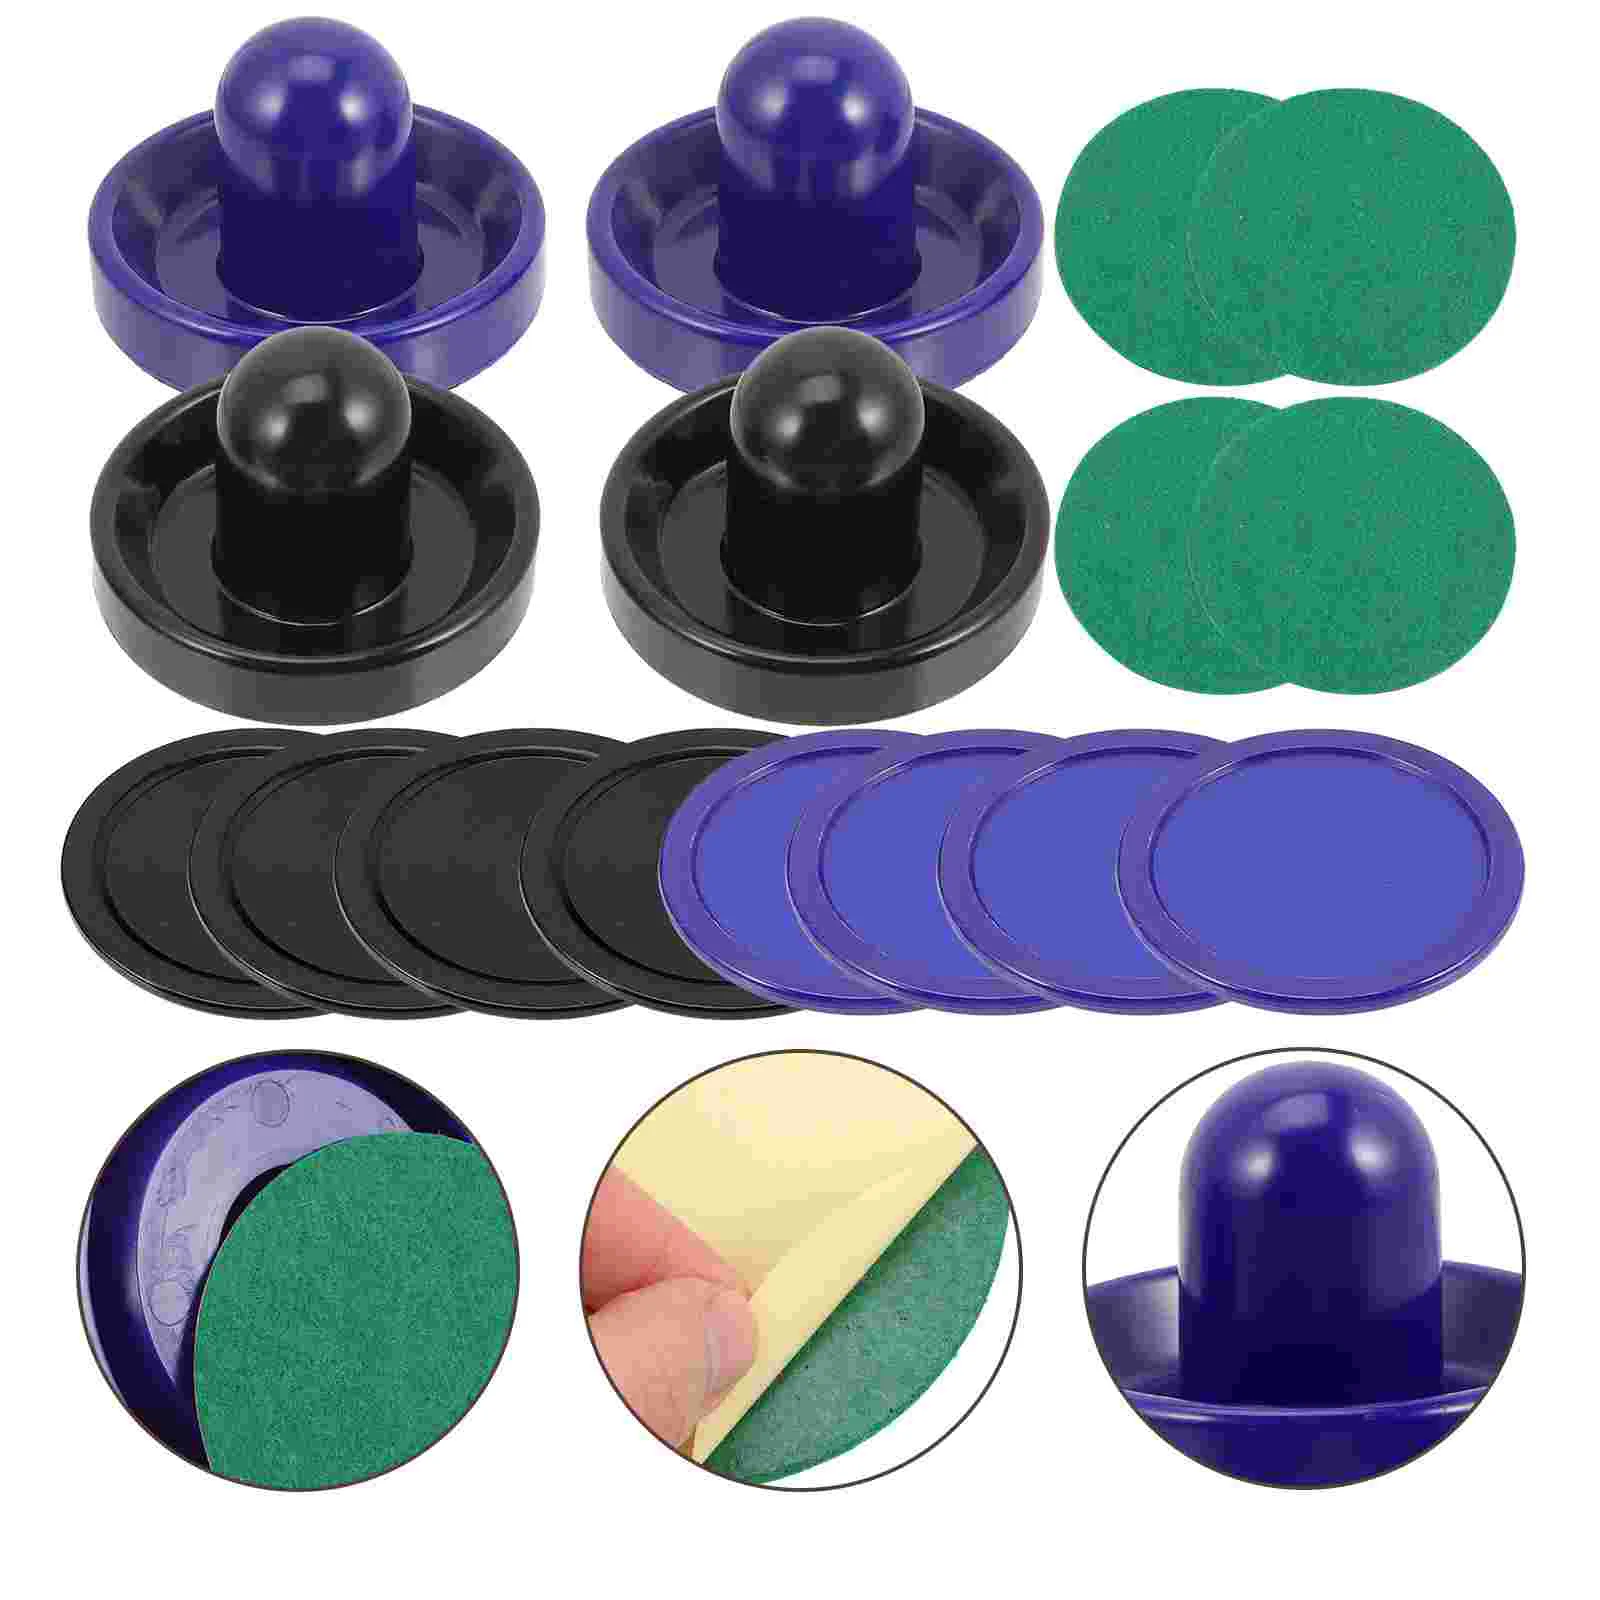 

1 Set of Plastic Air Toy Pushers Table Air Toy Game Toy Puckss Air Toy Pucks Air Toy Replacements